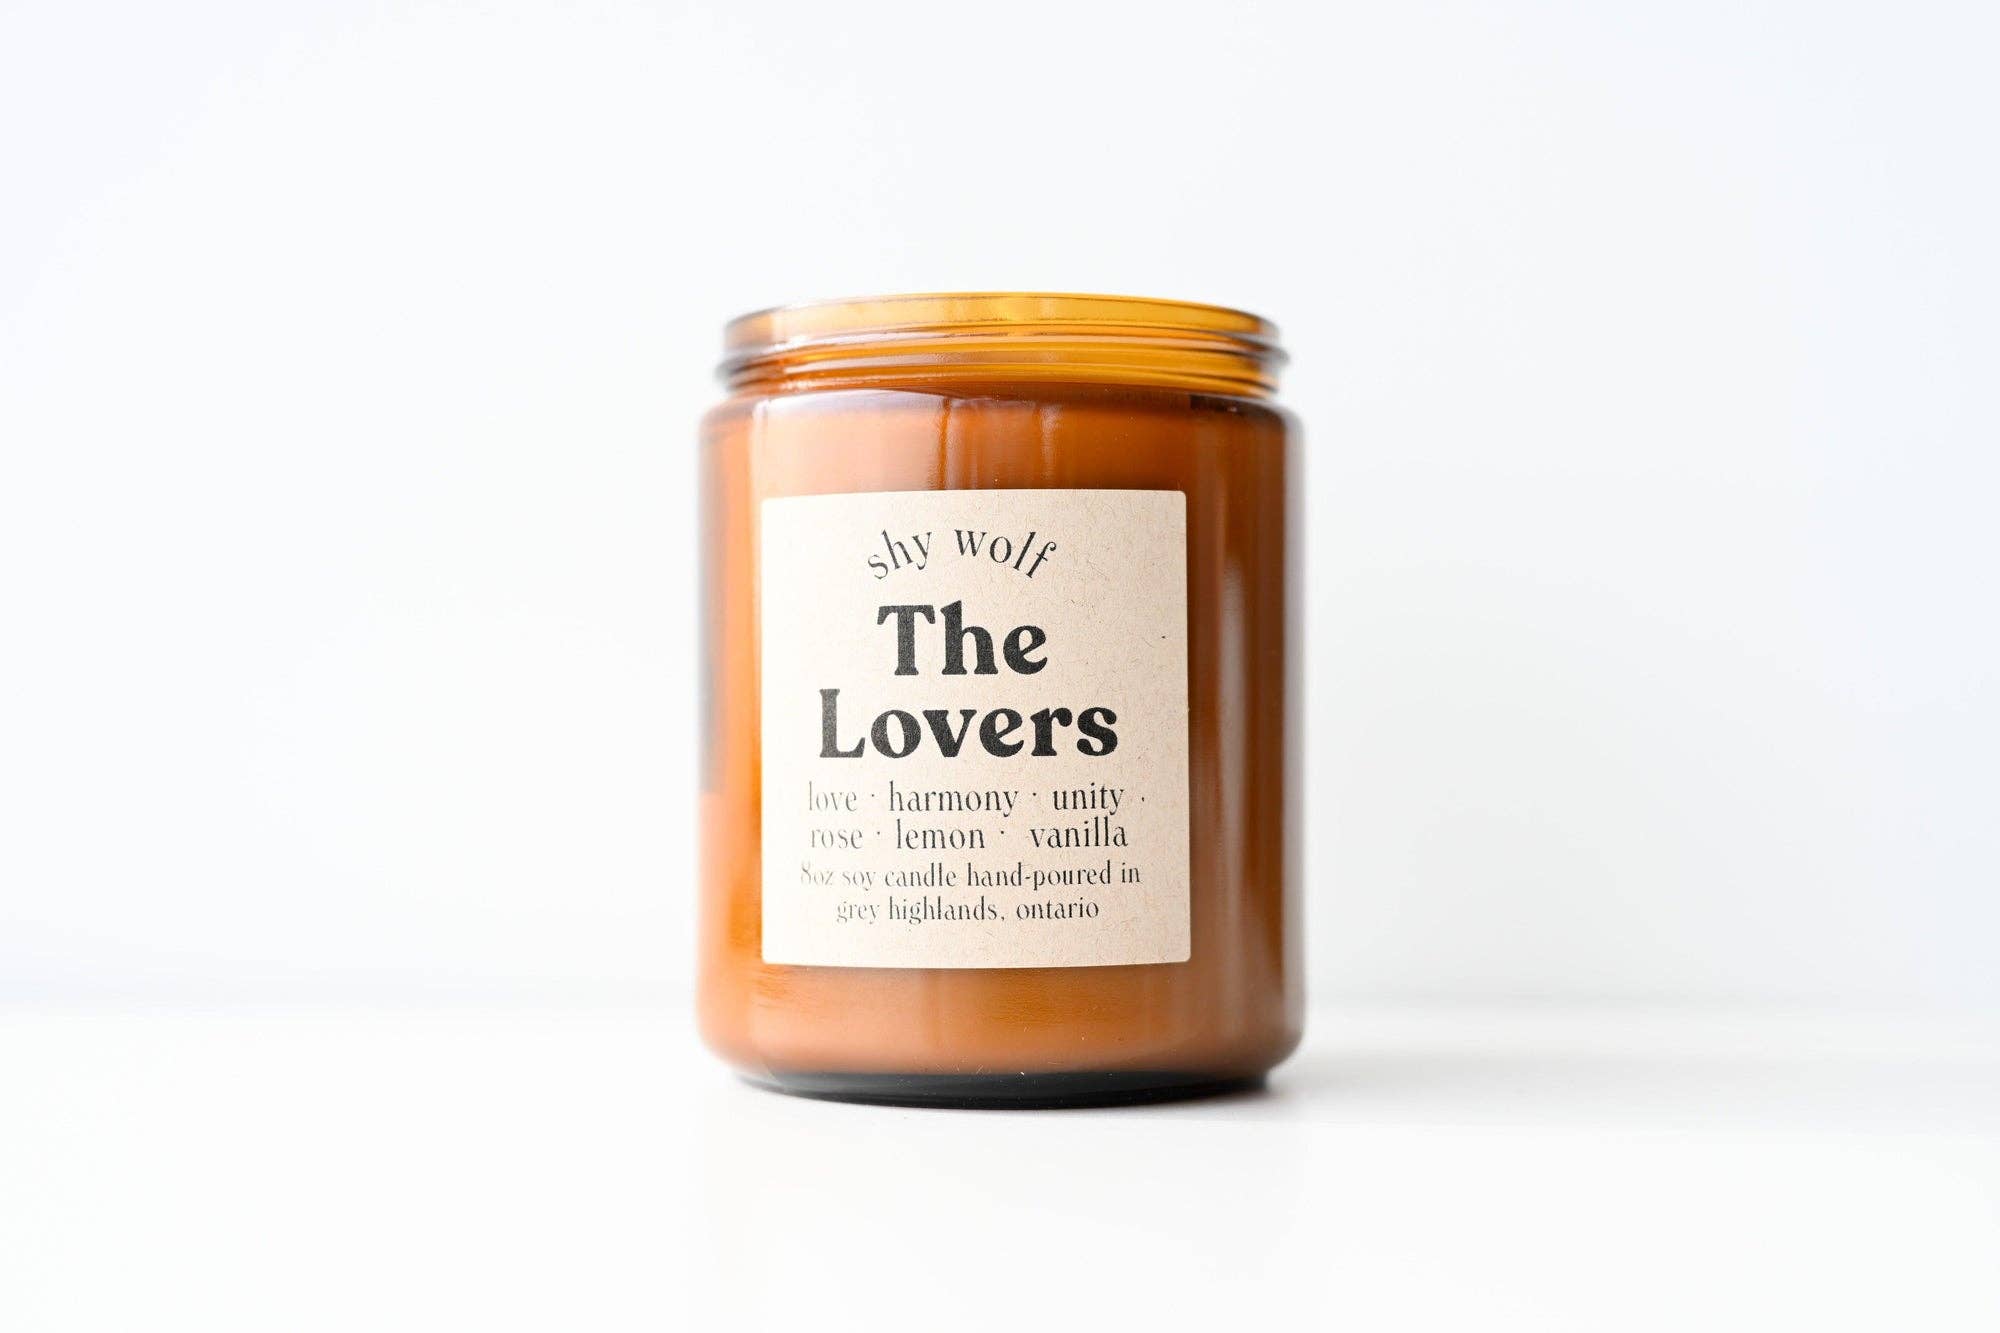 The Lovers Candle - Out of the Blue